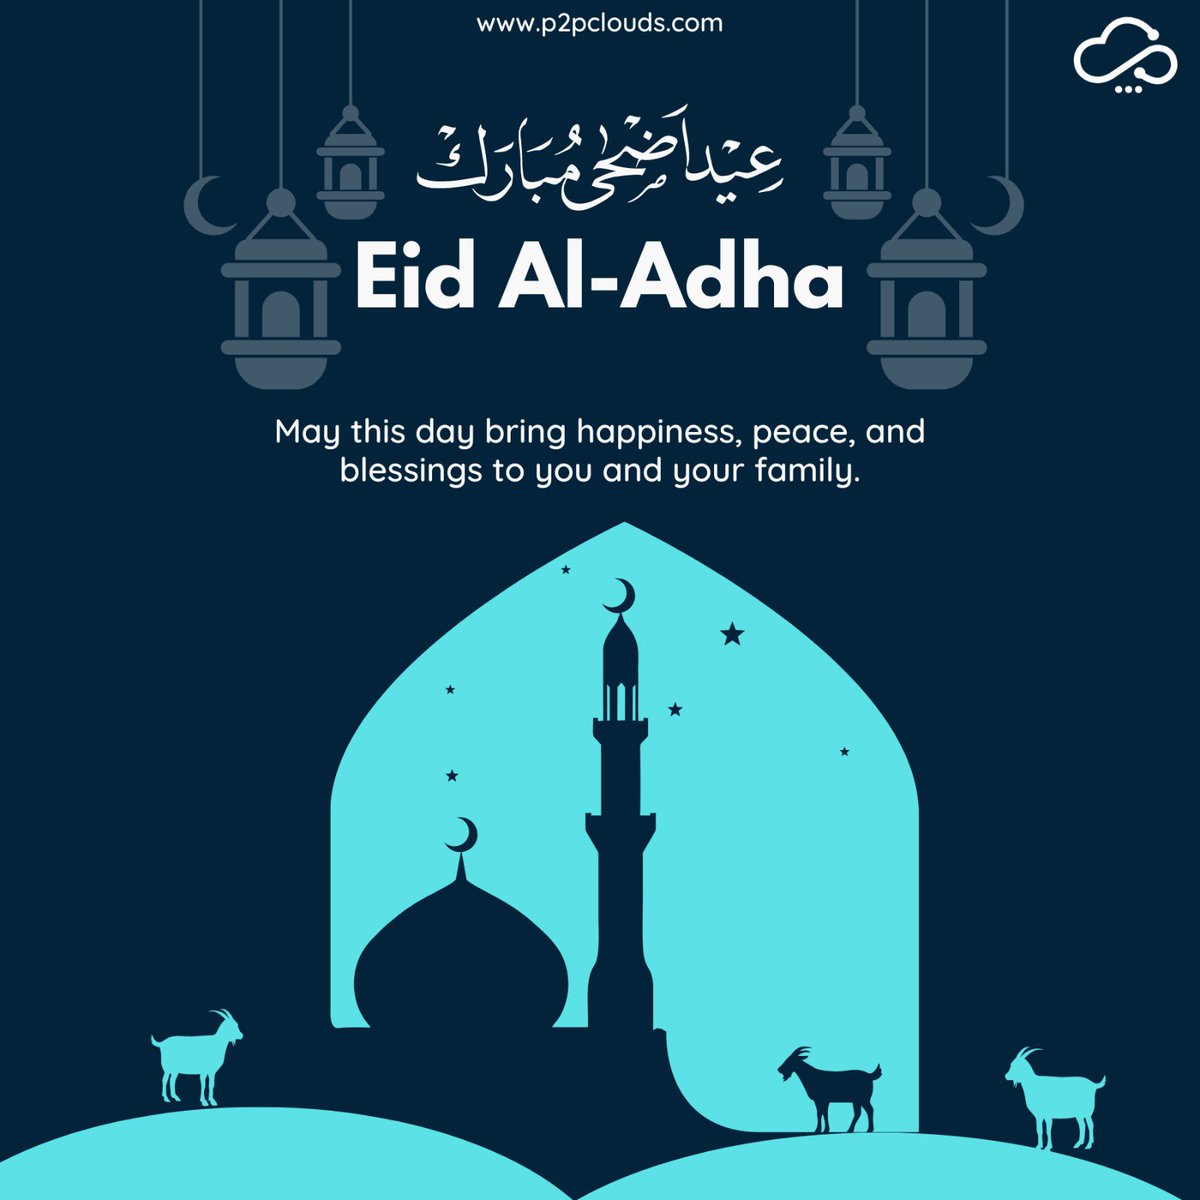 EID-UL-ADHA Mubarak To All Of You!

P2P Clouds  sends its best wishes to you and your loved ones as the festive occasion of  𝑬𝒊𝒅 𝒖𝒍 𝑨𝒅𝒉𝒂.

 #eiduladha #EidWishes #EidMubarak  #EidGreetings #P2Pclouds 
#عیدقربان #عيدالاضحى